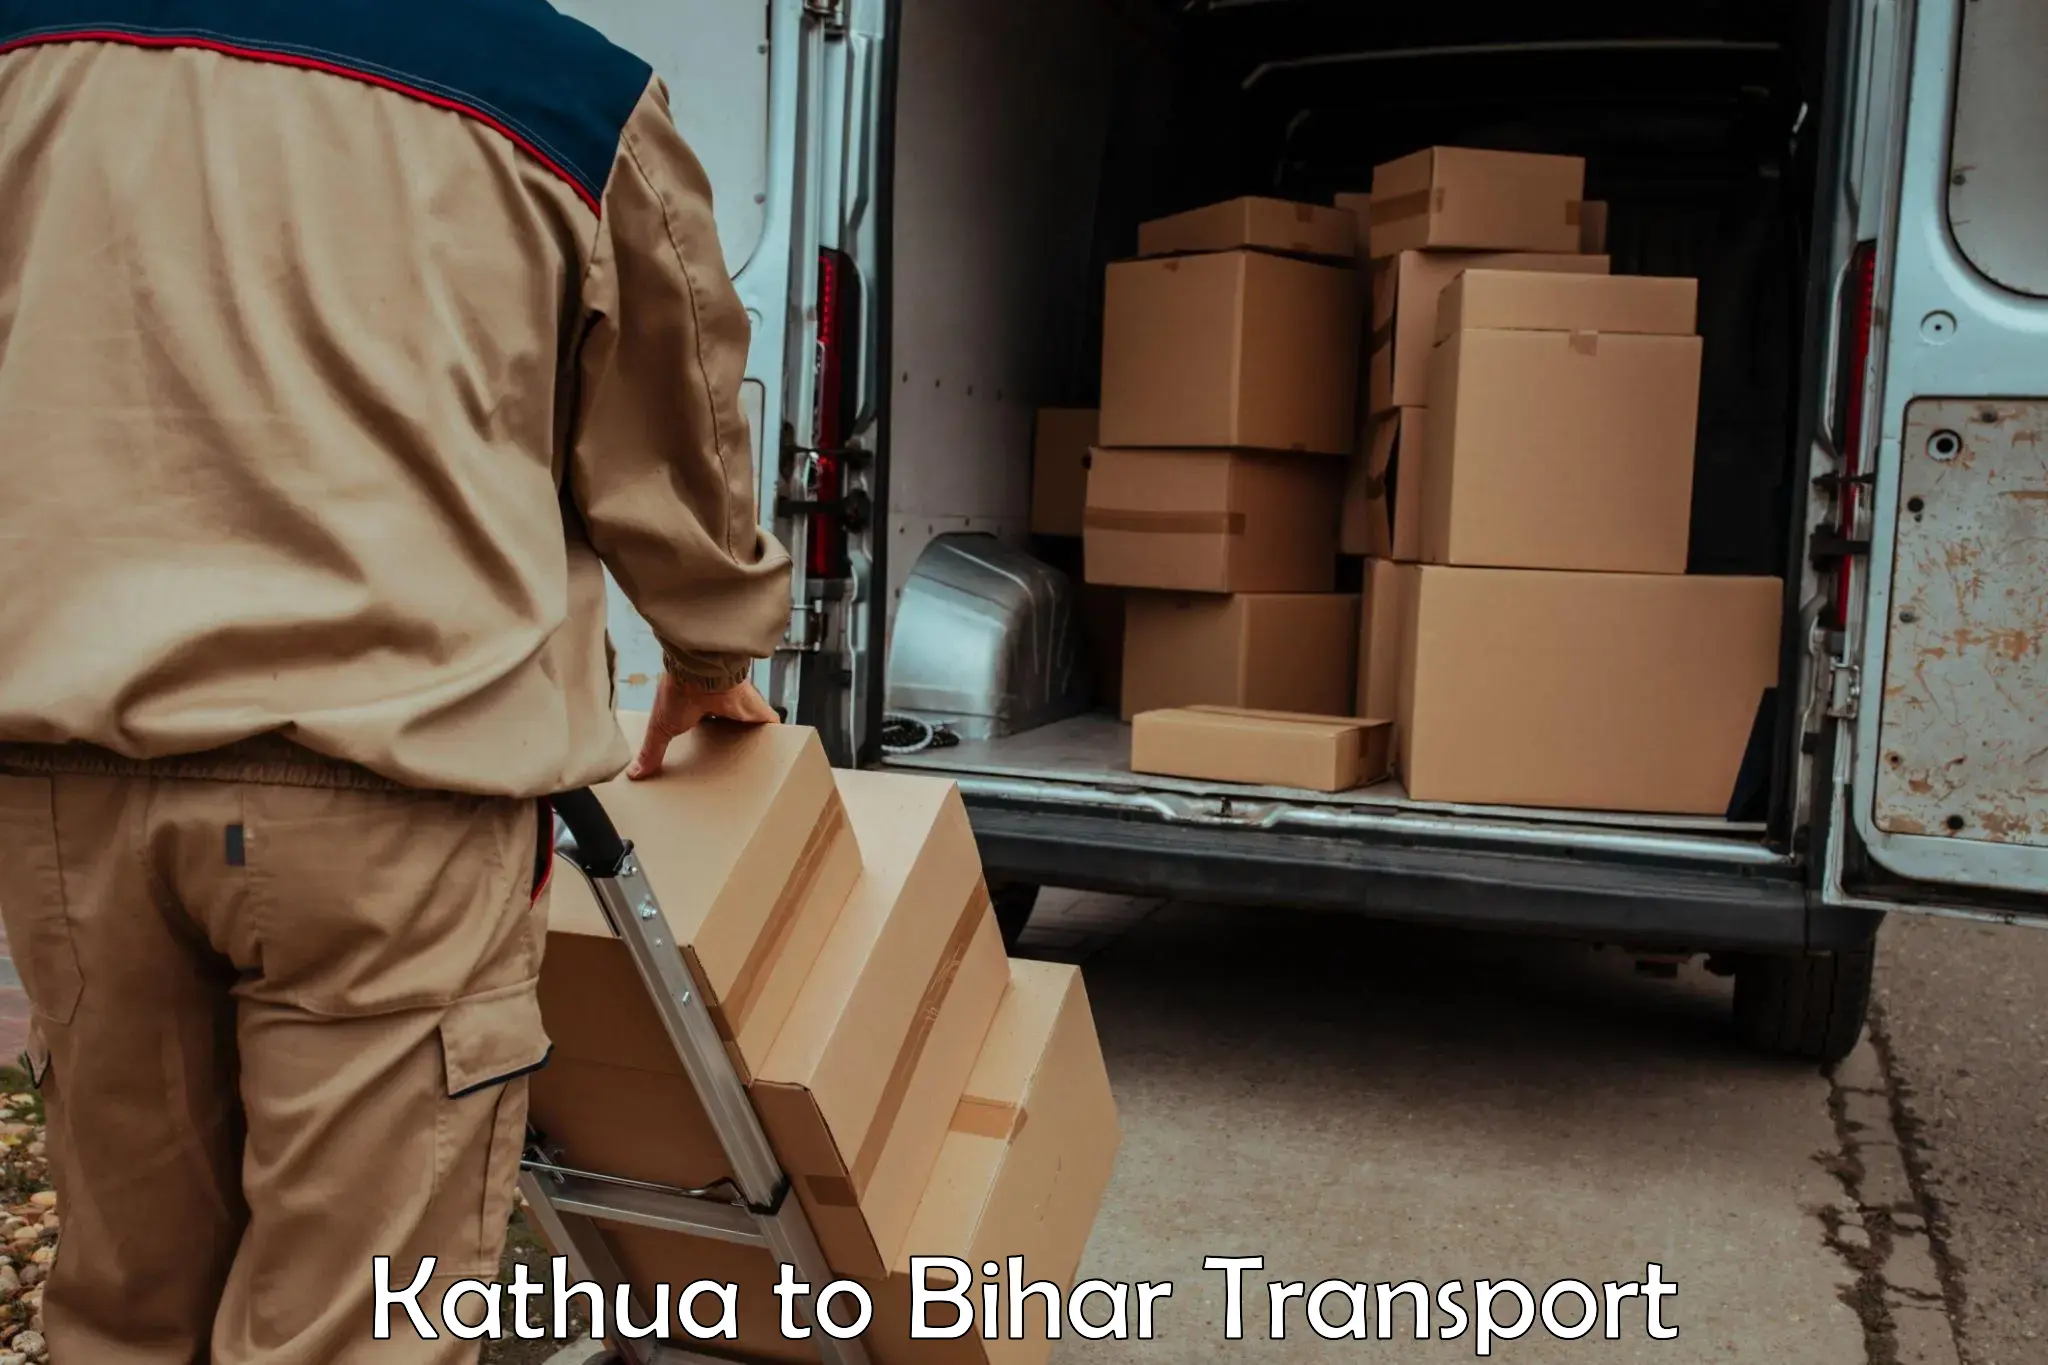 Part load transport service in India Kathua to Bihta